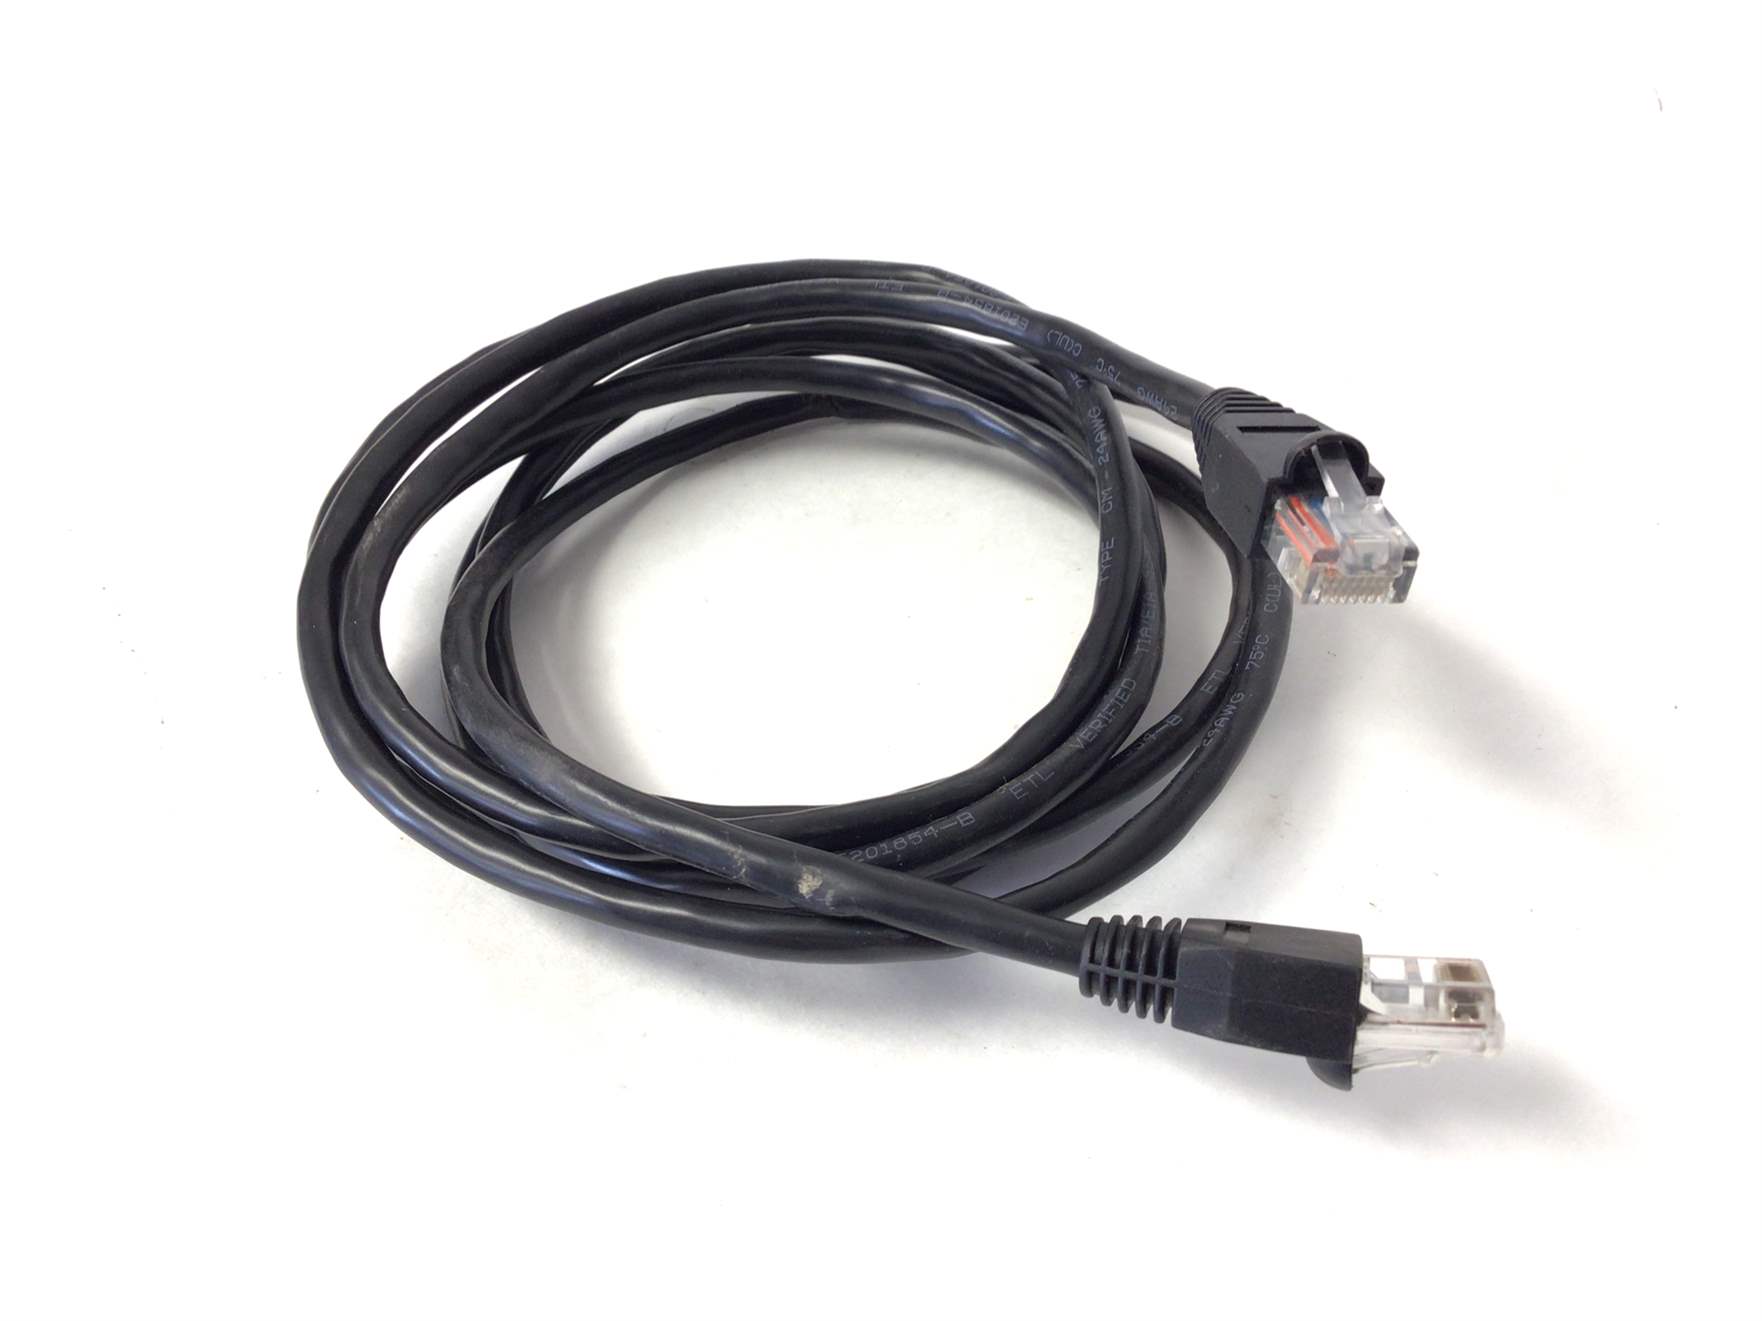 Console Cable RJ45 Data Wire (Used)